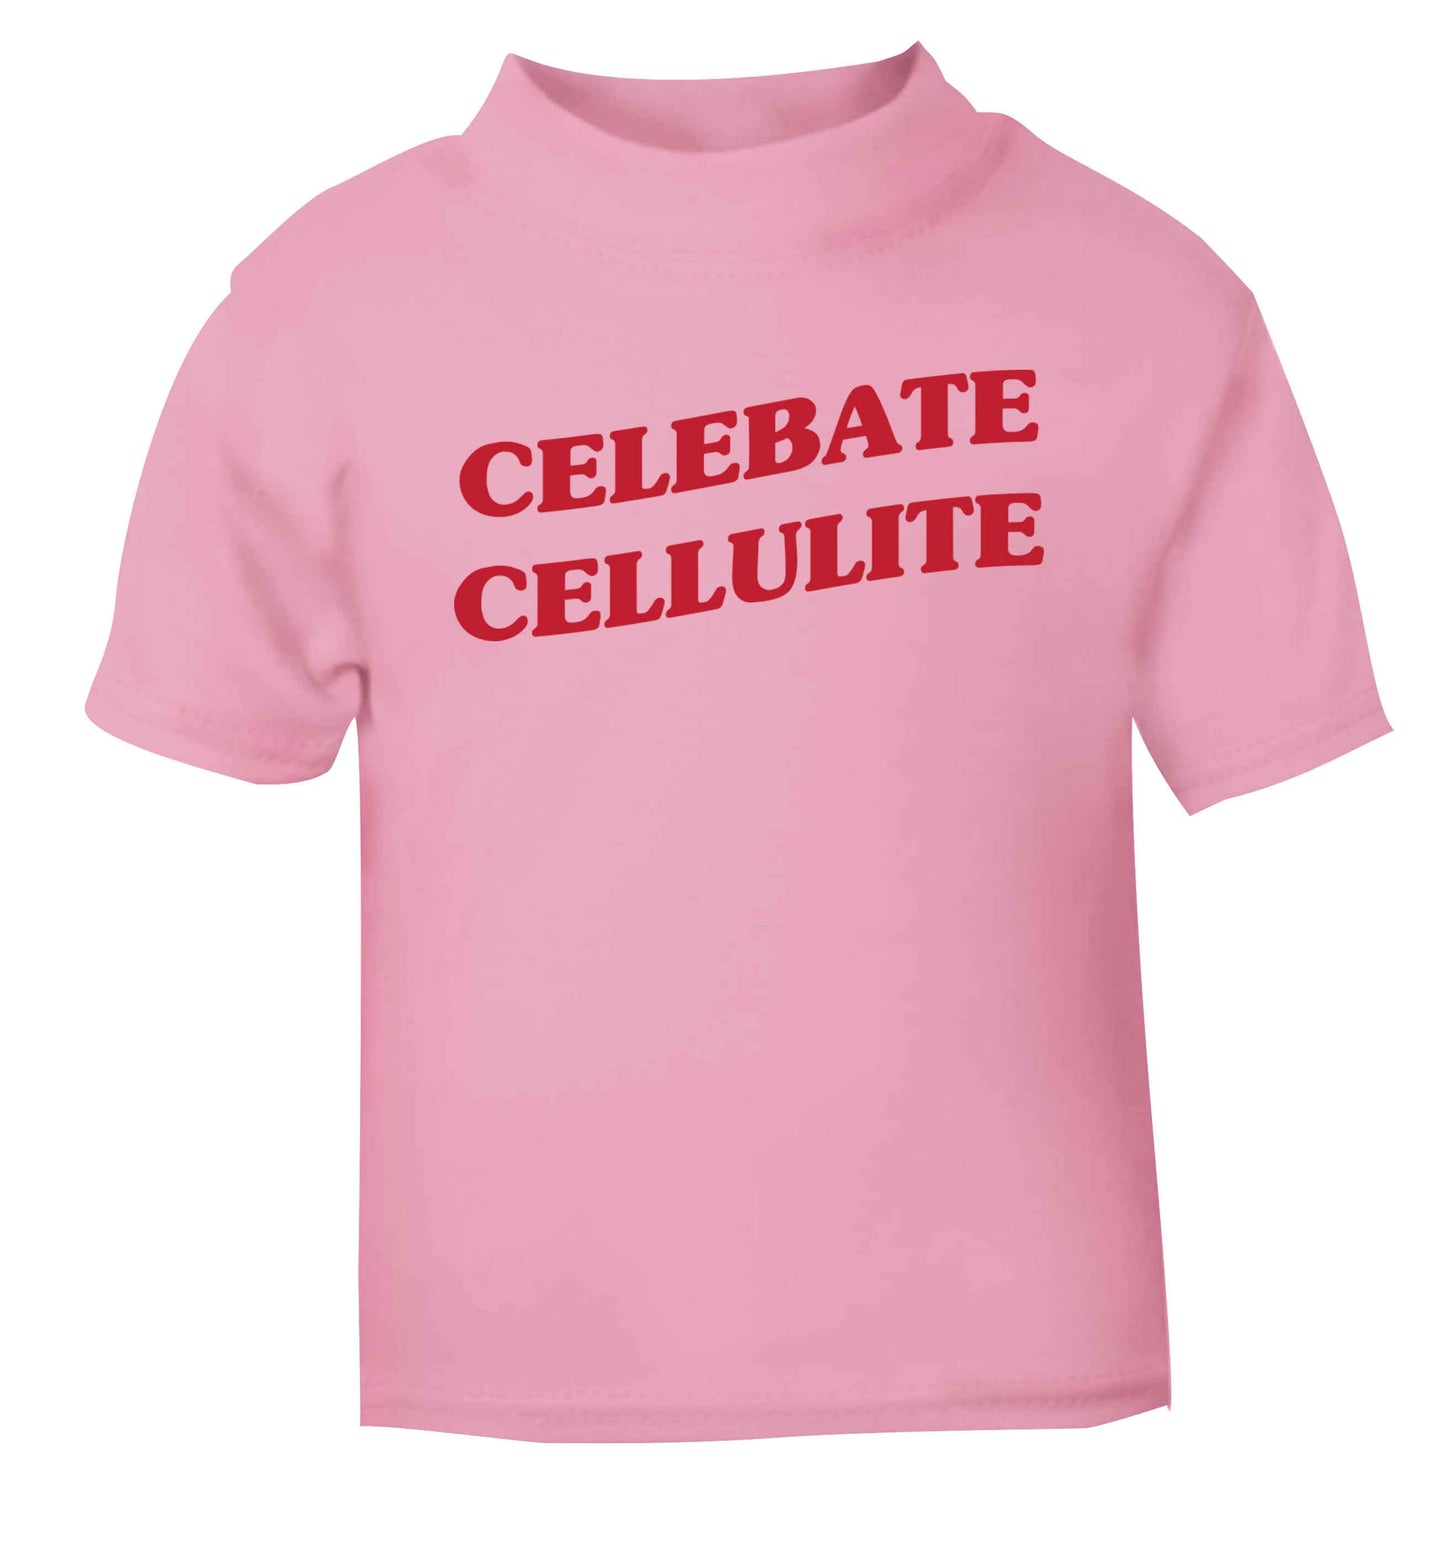 Celebrate cellulite light pink baby toddler Tshirt 2 Years